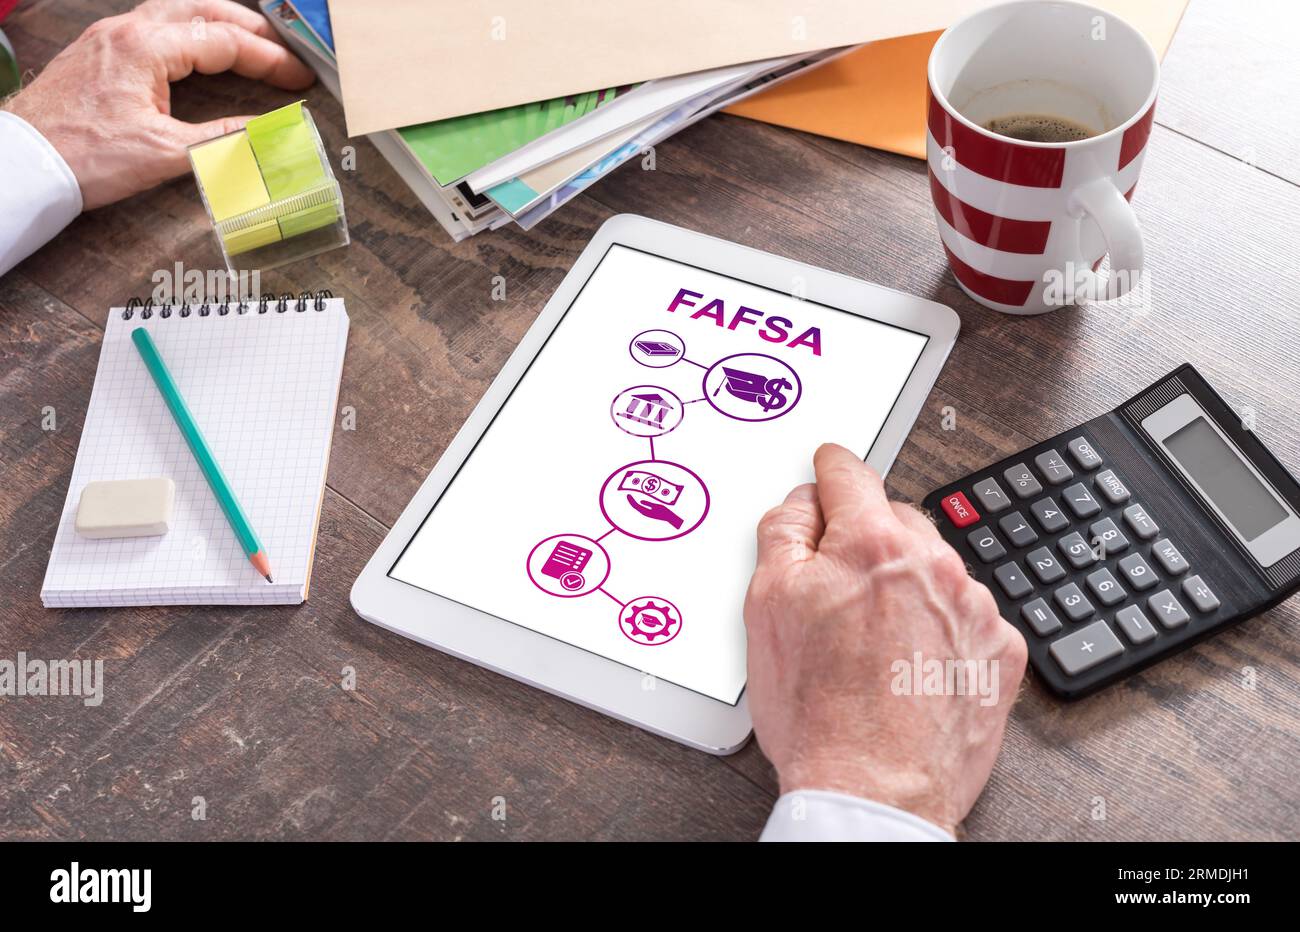 Man using a tablet showing a fafsa concept Stock Photo